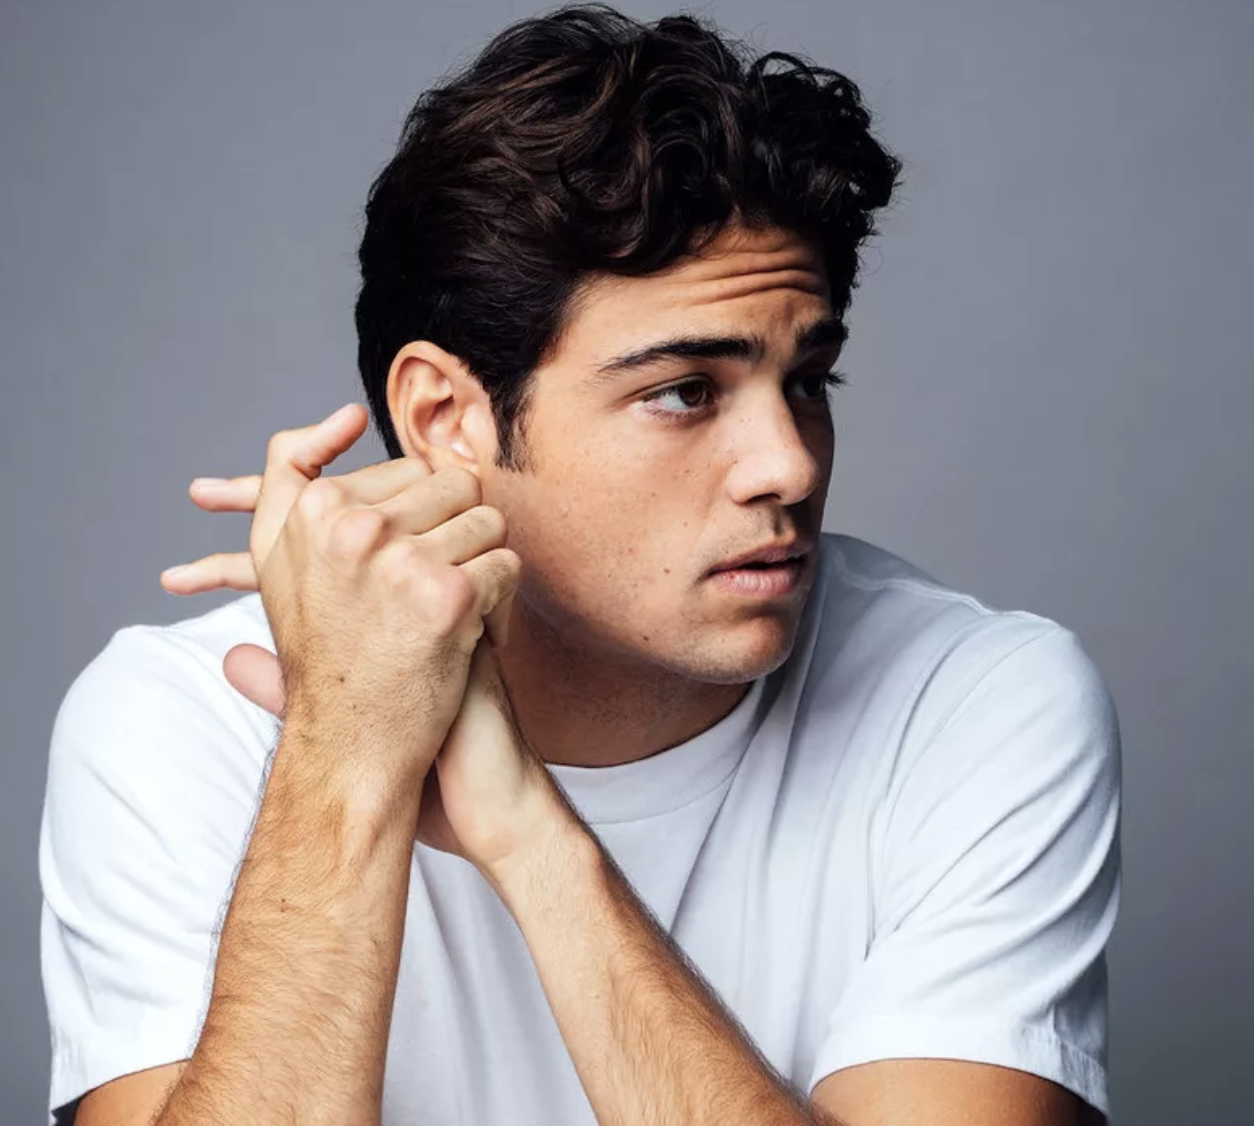 Here's A Test To See If You Can Resist Noah Centineo's Charm